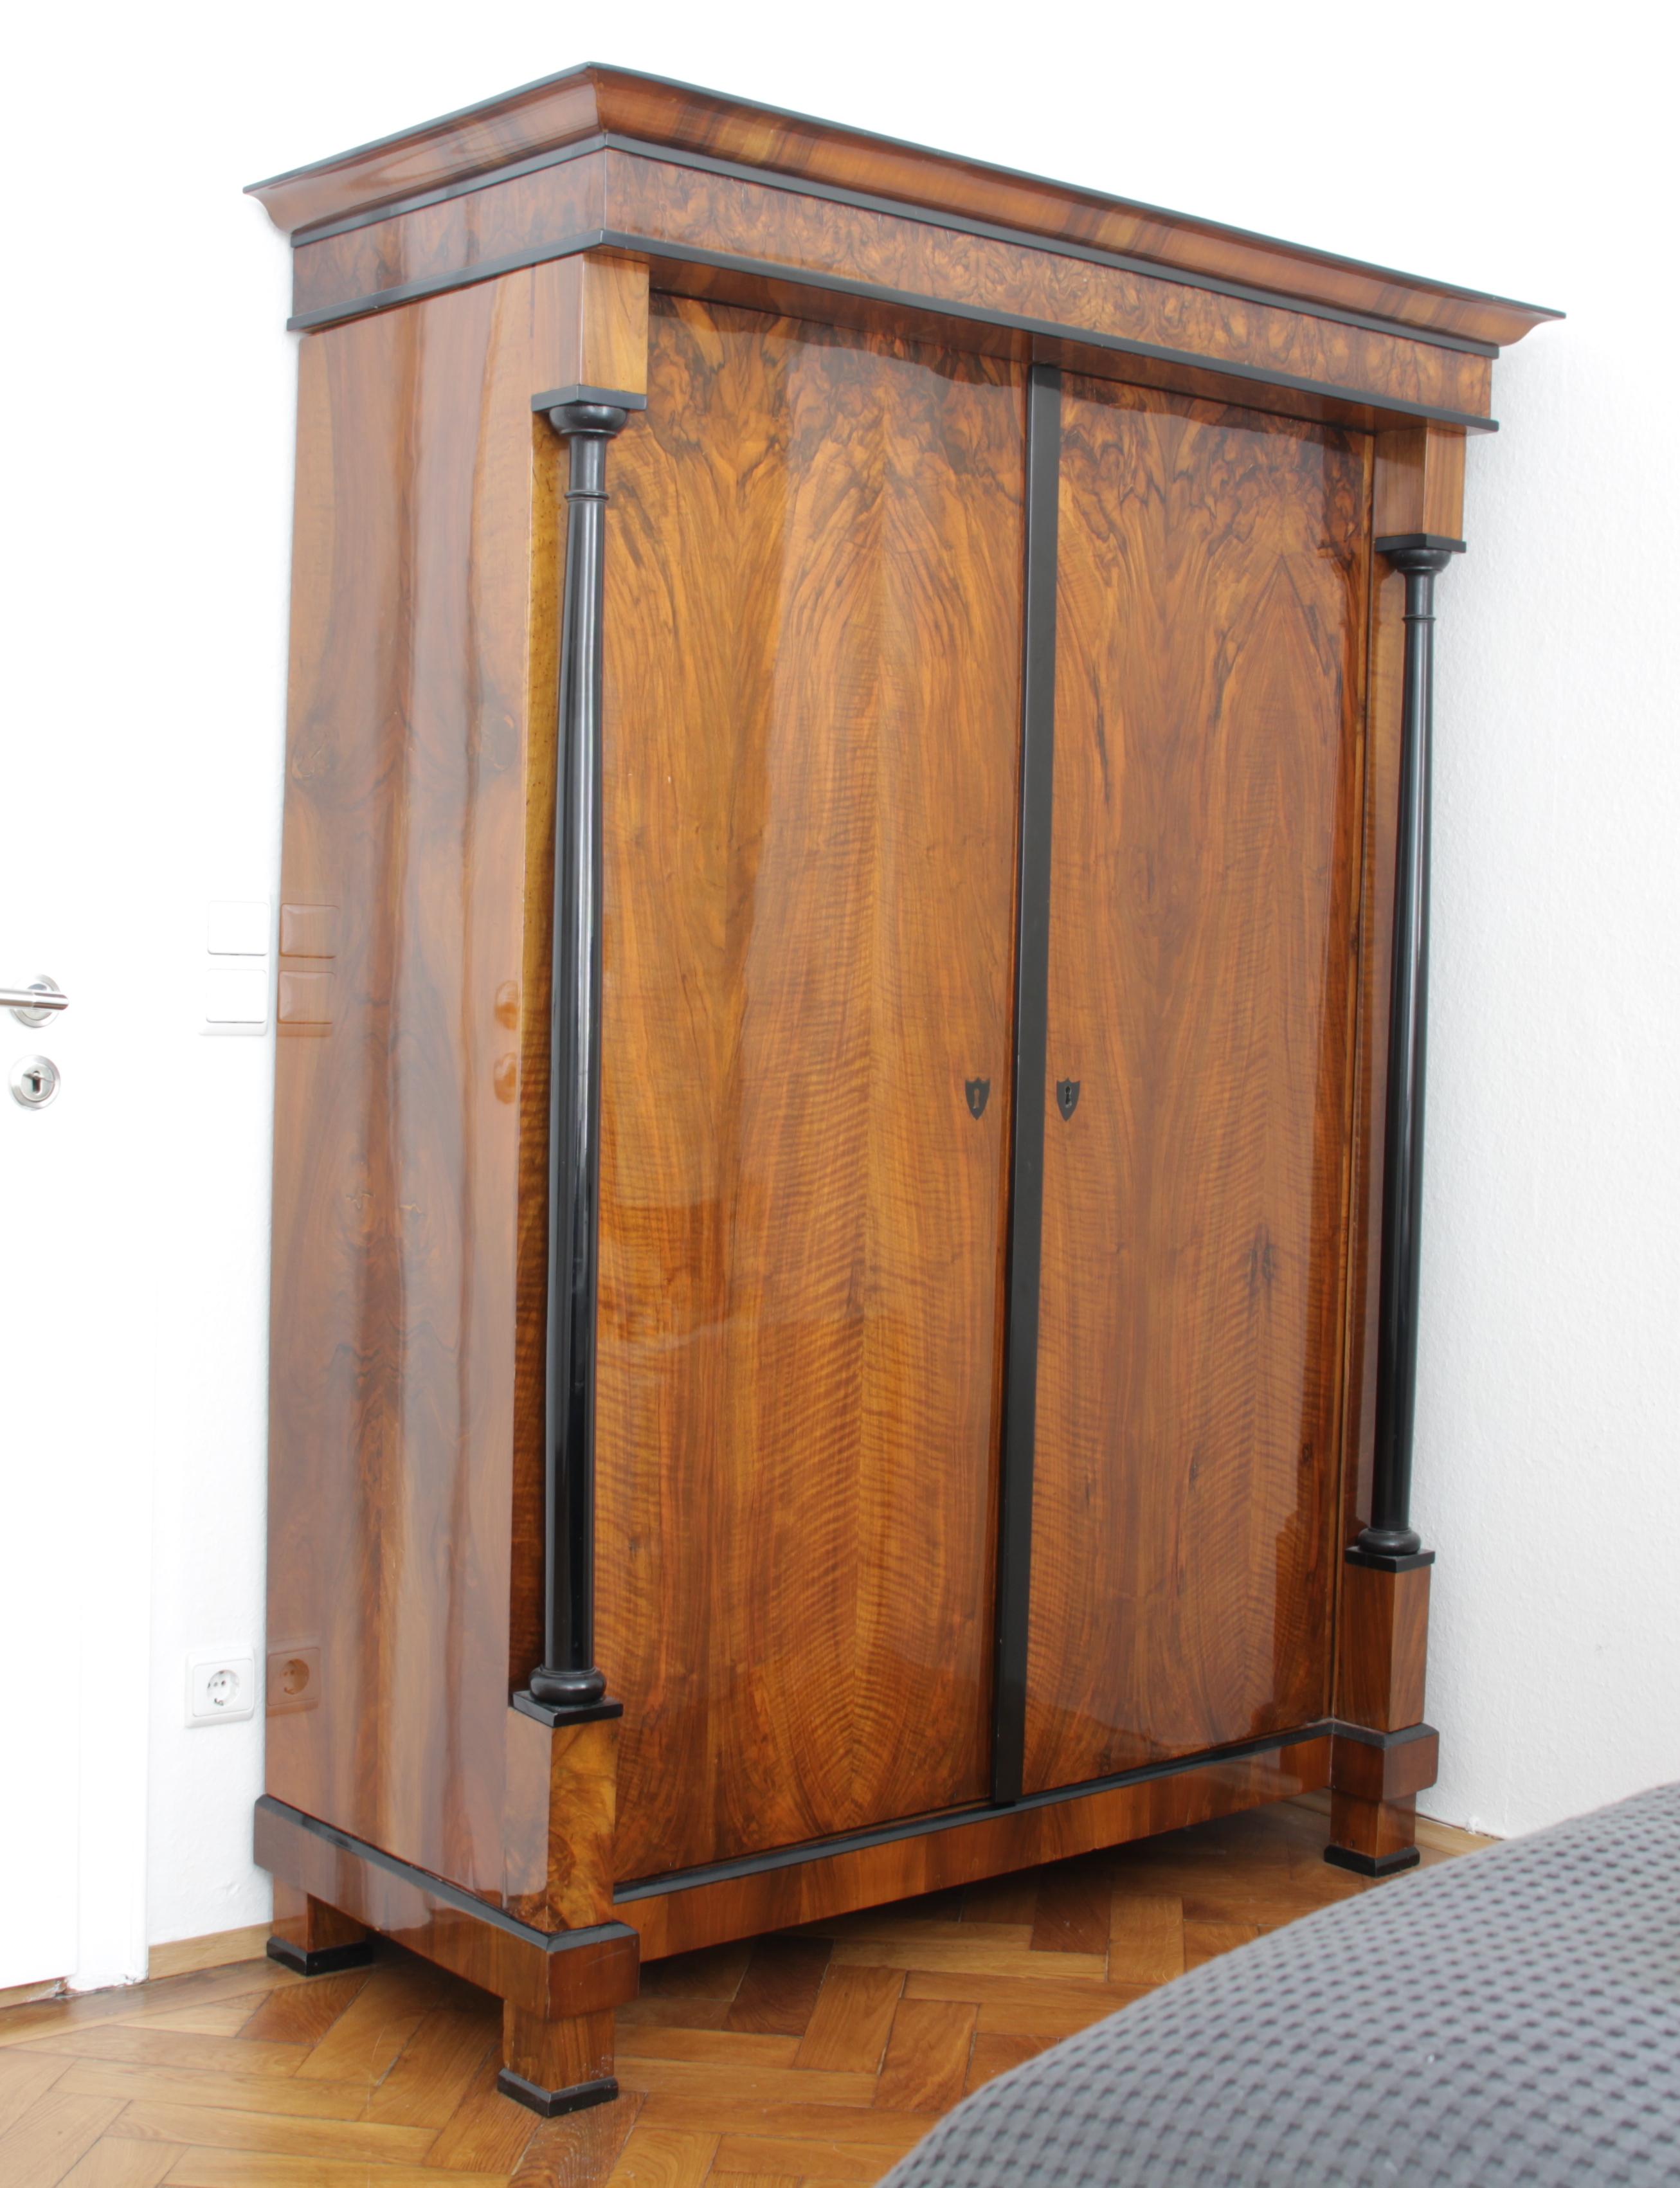 Straightlined, unadorned early Biedermeier Armoire from Austria, circa 1820.
This two-door neoclassical armoire or wardrobe has a beautifully selected, book-matched walnut veneer and ebonized full columns with carved capitals and bases.
It has been